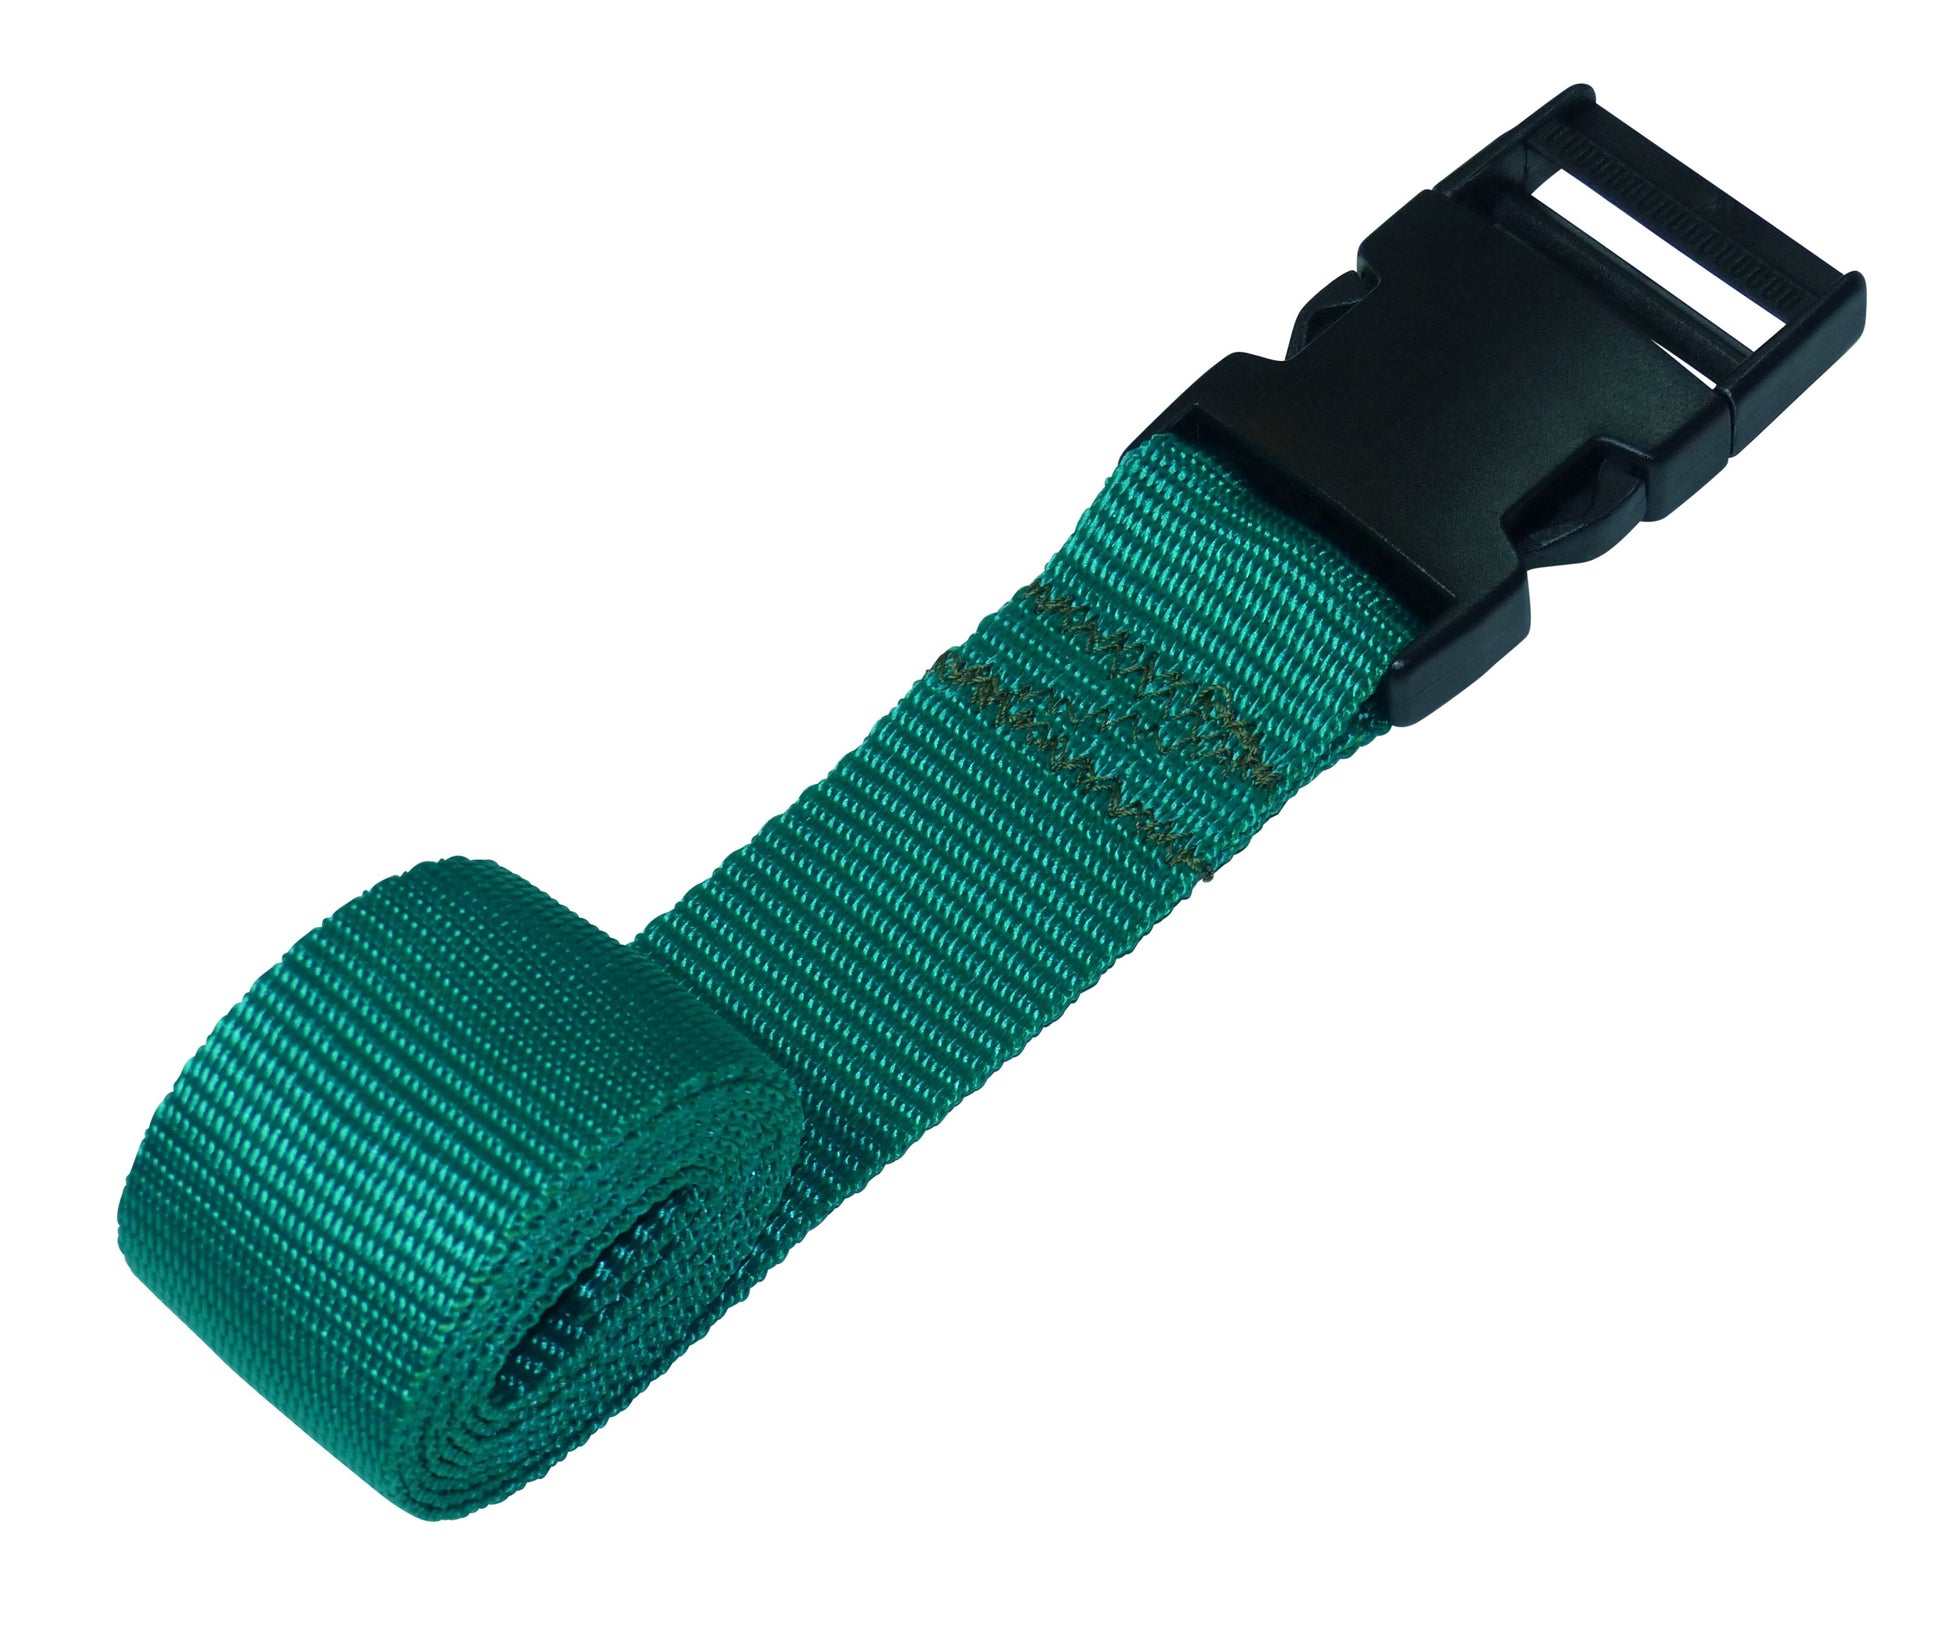 Benristraps 38mm Webbing Strap with Quick Release Buckle in emerald green